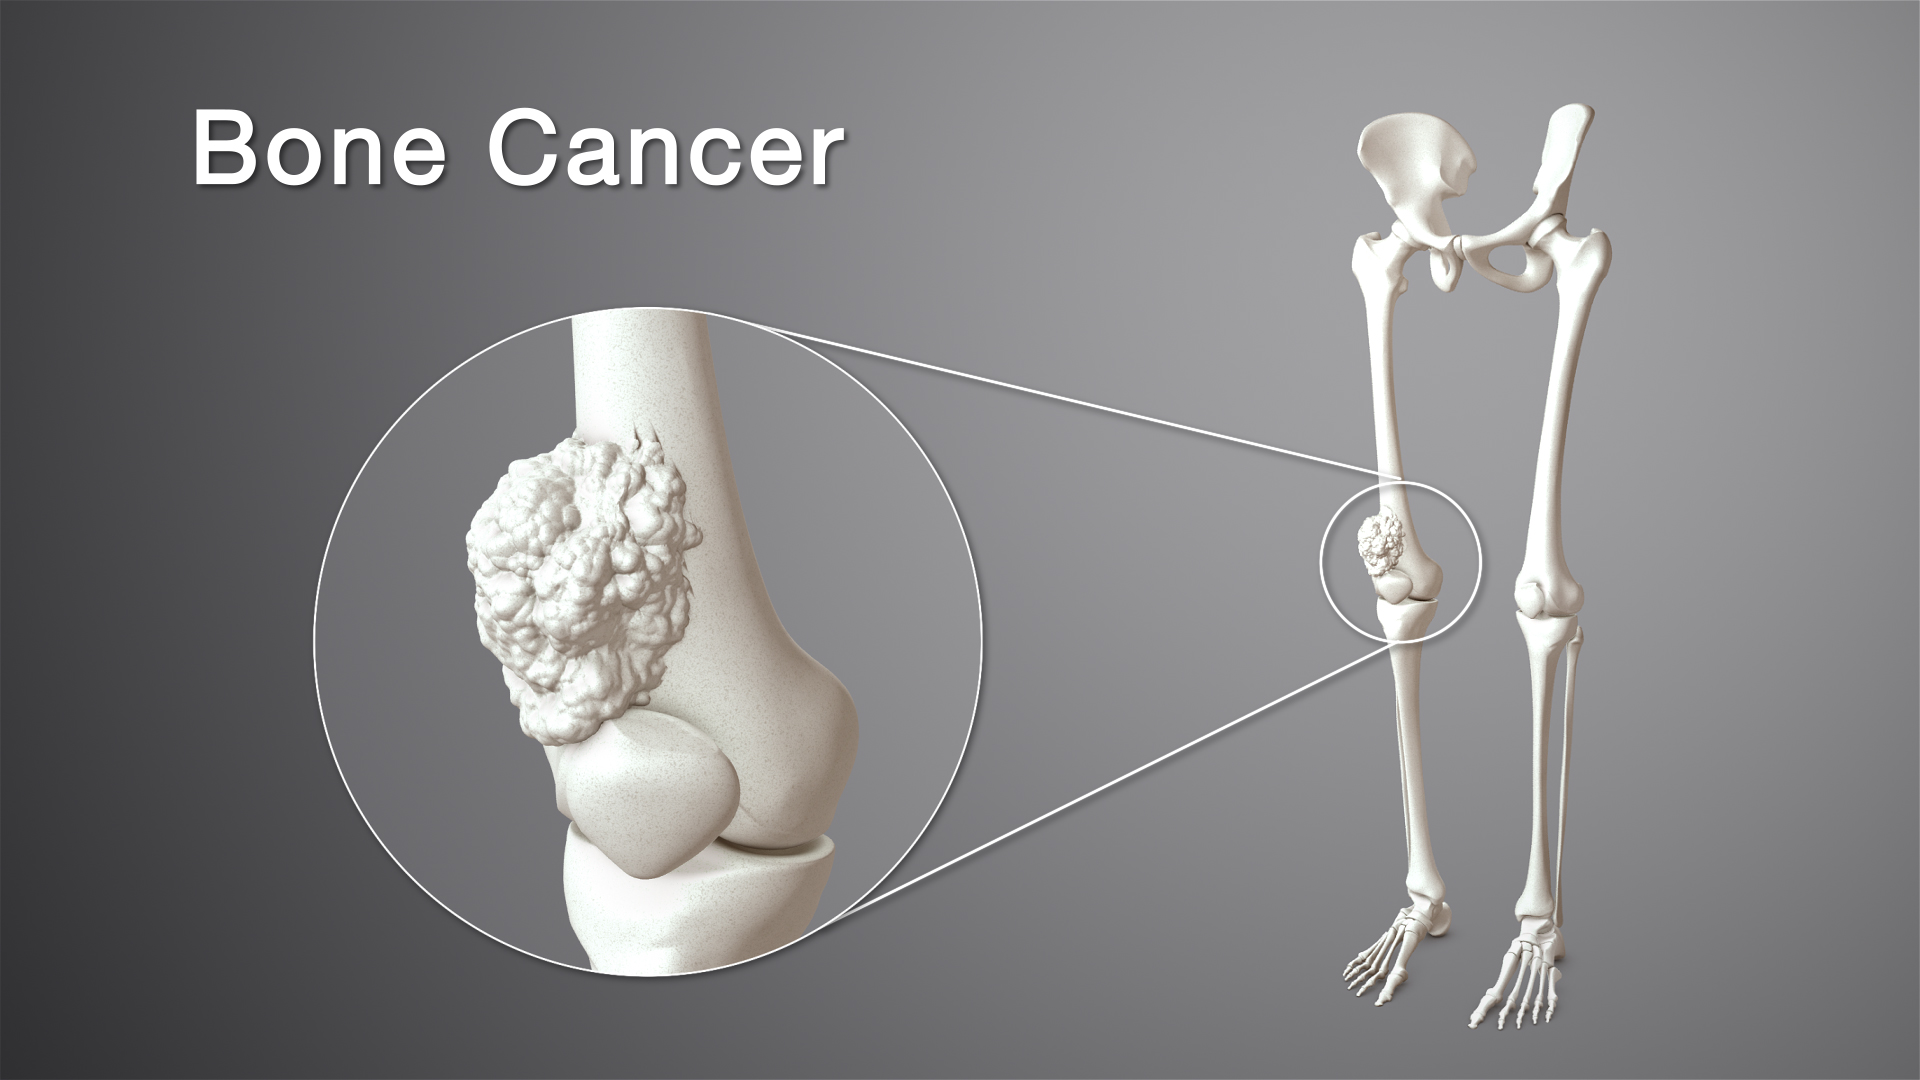 Bone Cancer: Types, Symptoms, Causes and Treatment - Scientific Animations